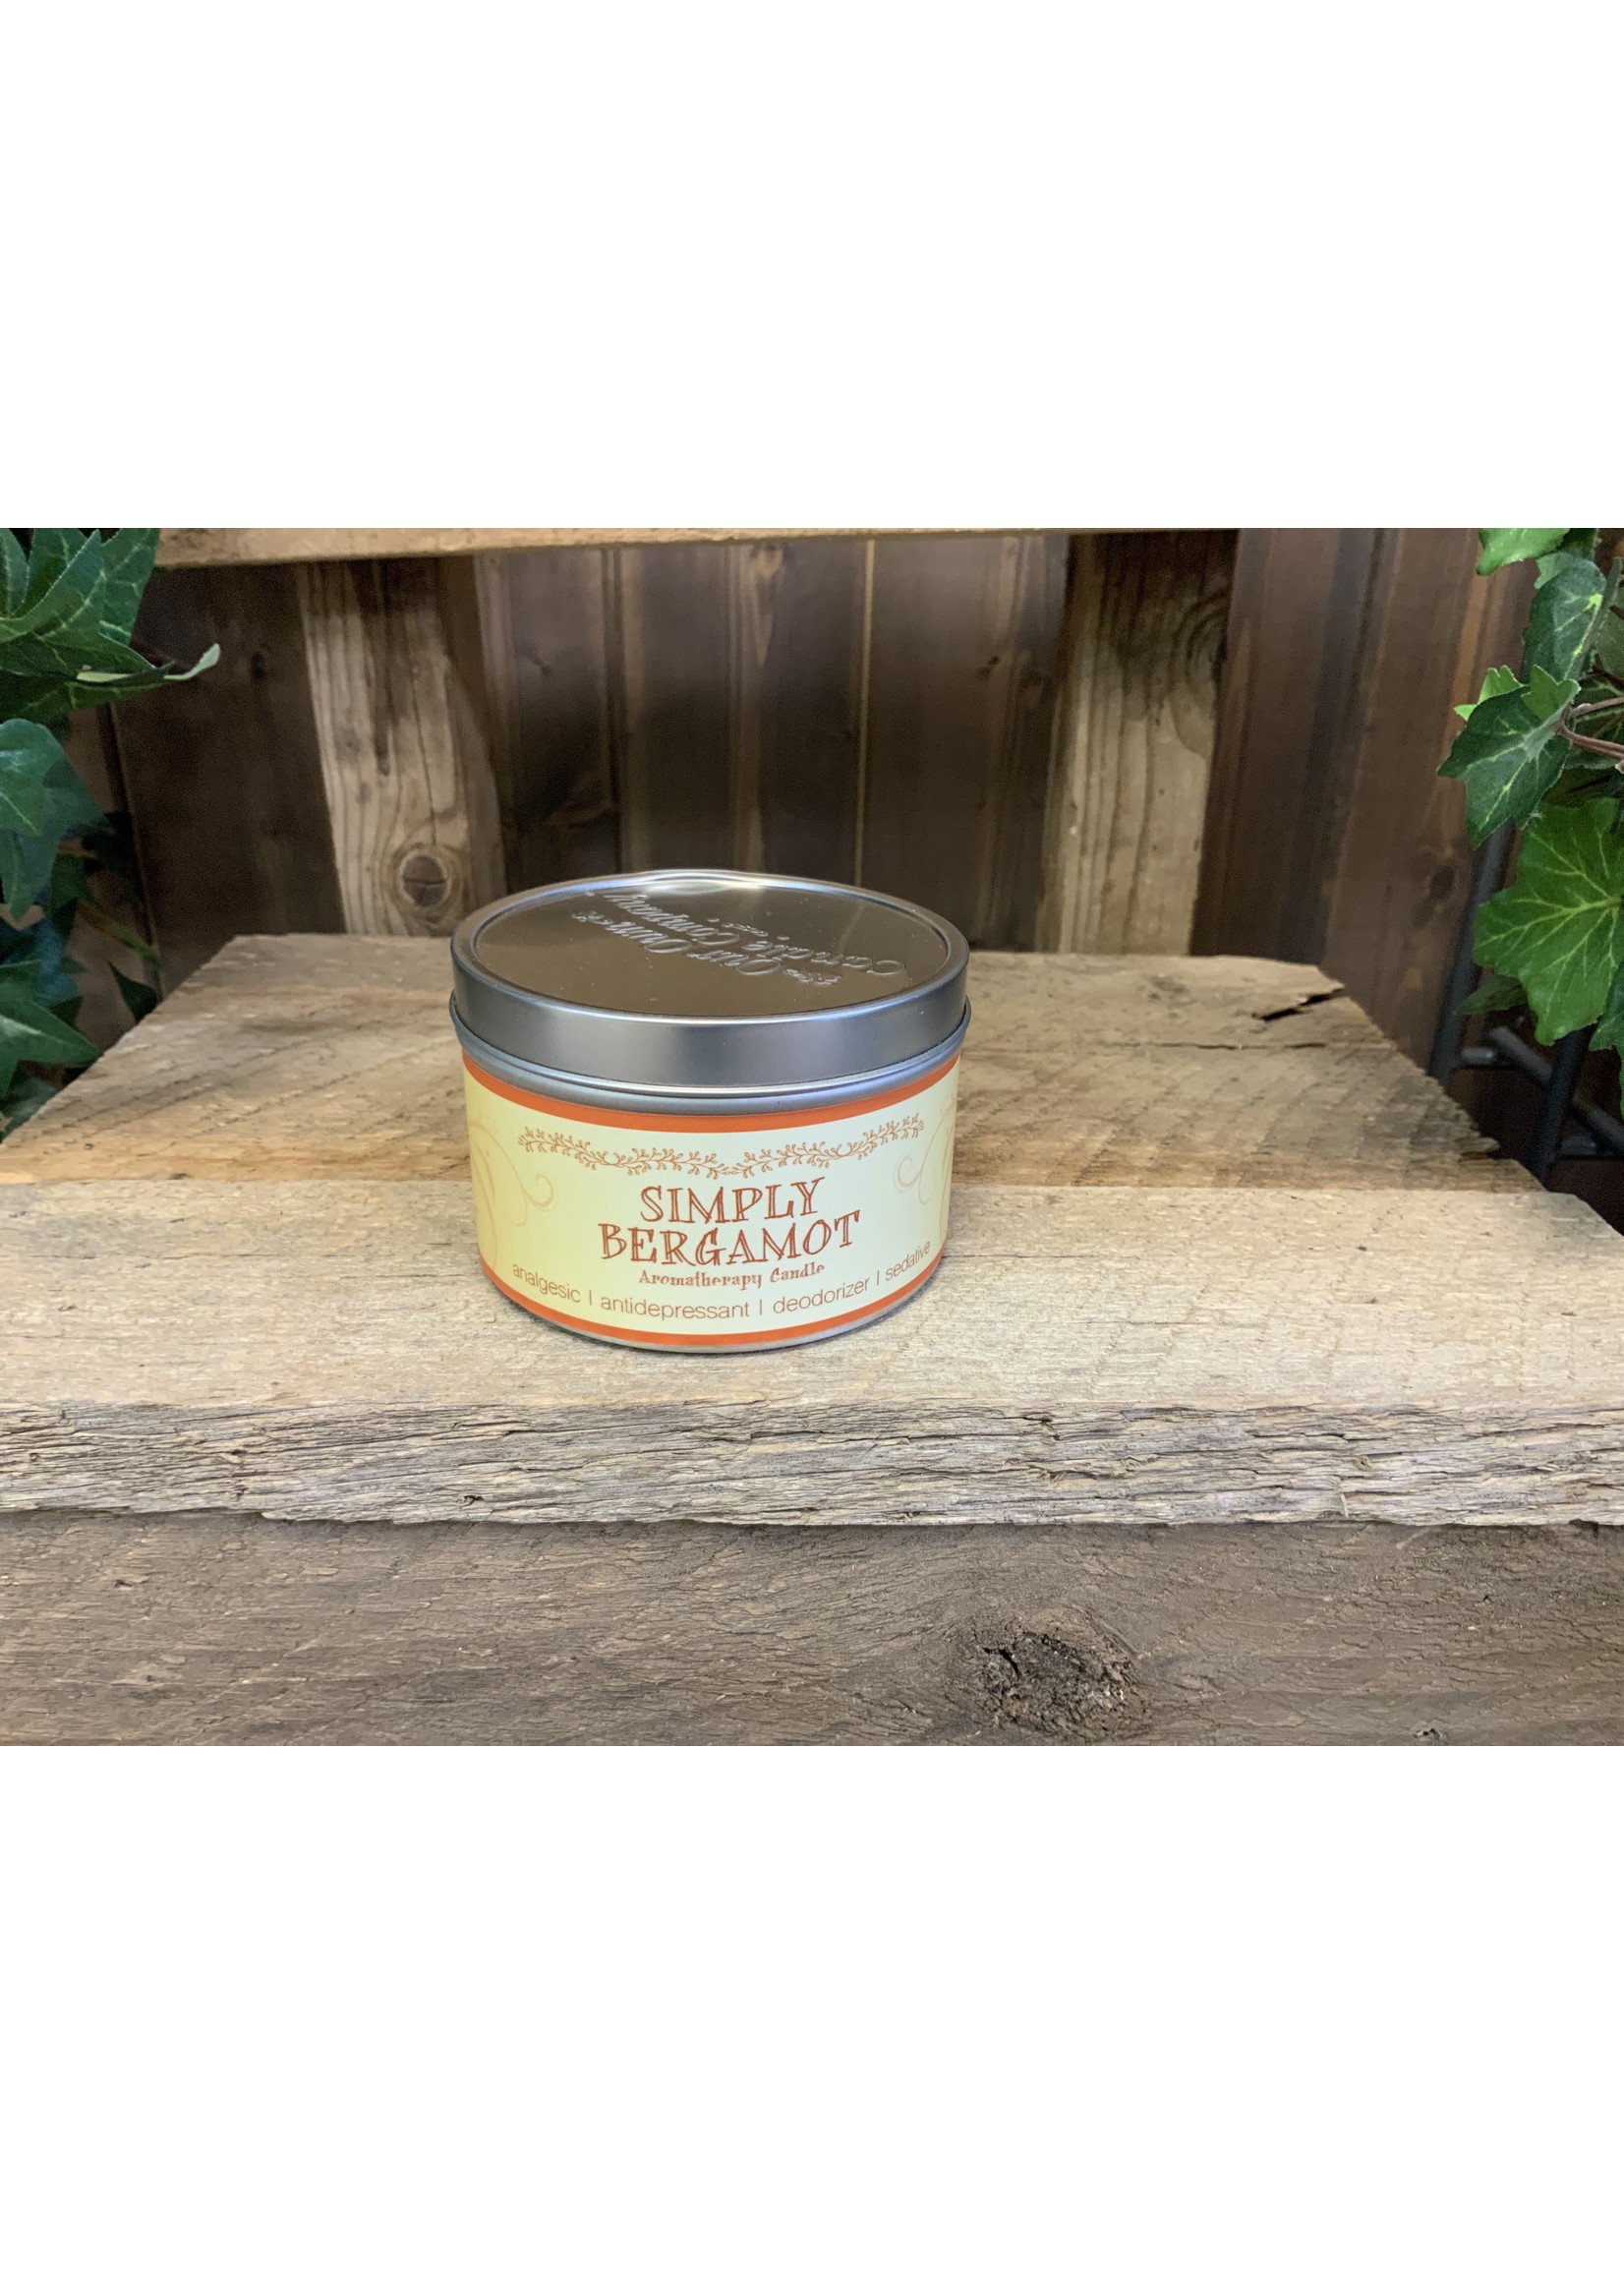 OUR AROMATHERAPY CANDLE